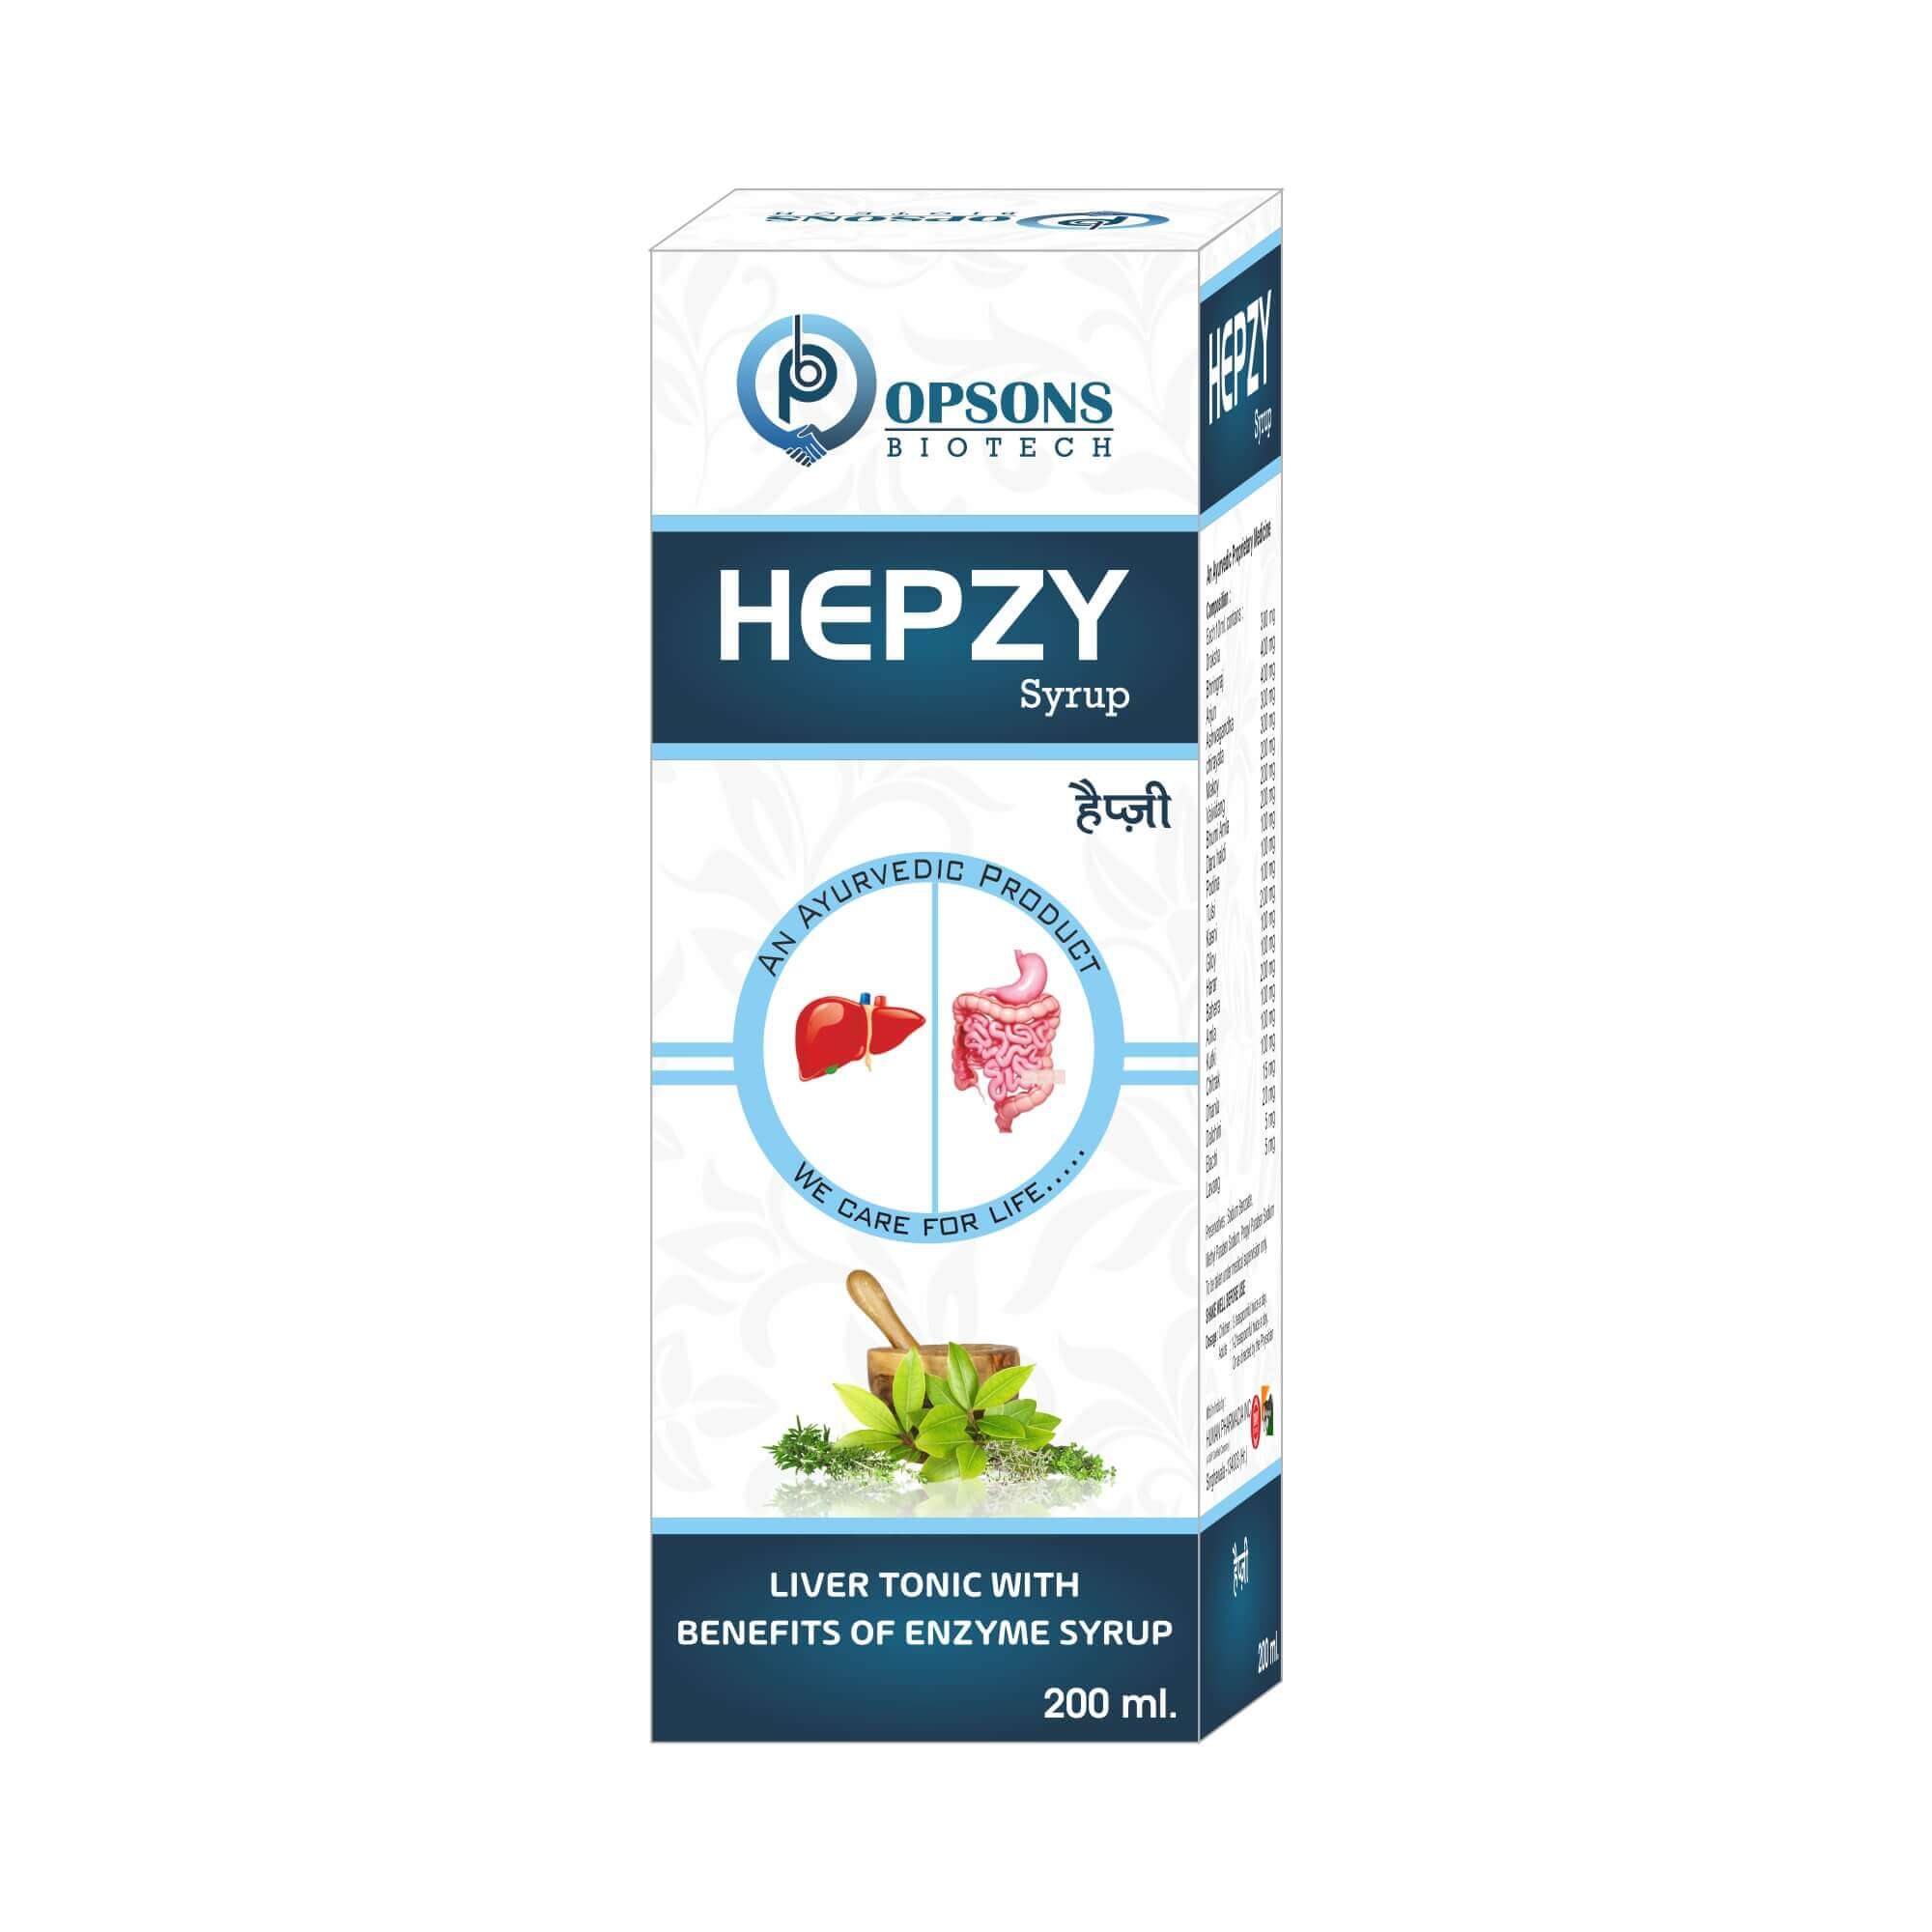 Product Name: Hepzy, Compositions of Hepzy are Liver Tonic with Benefits of Enzyme Syrup - Opsons Biotech